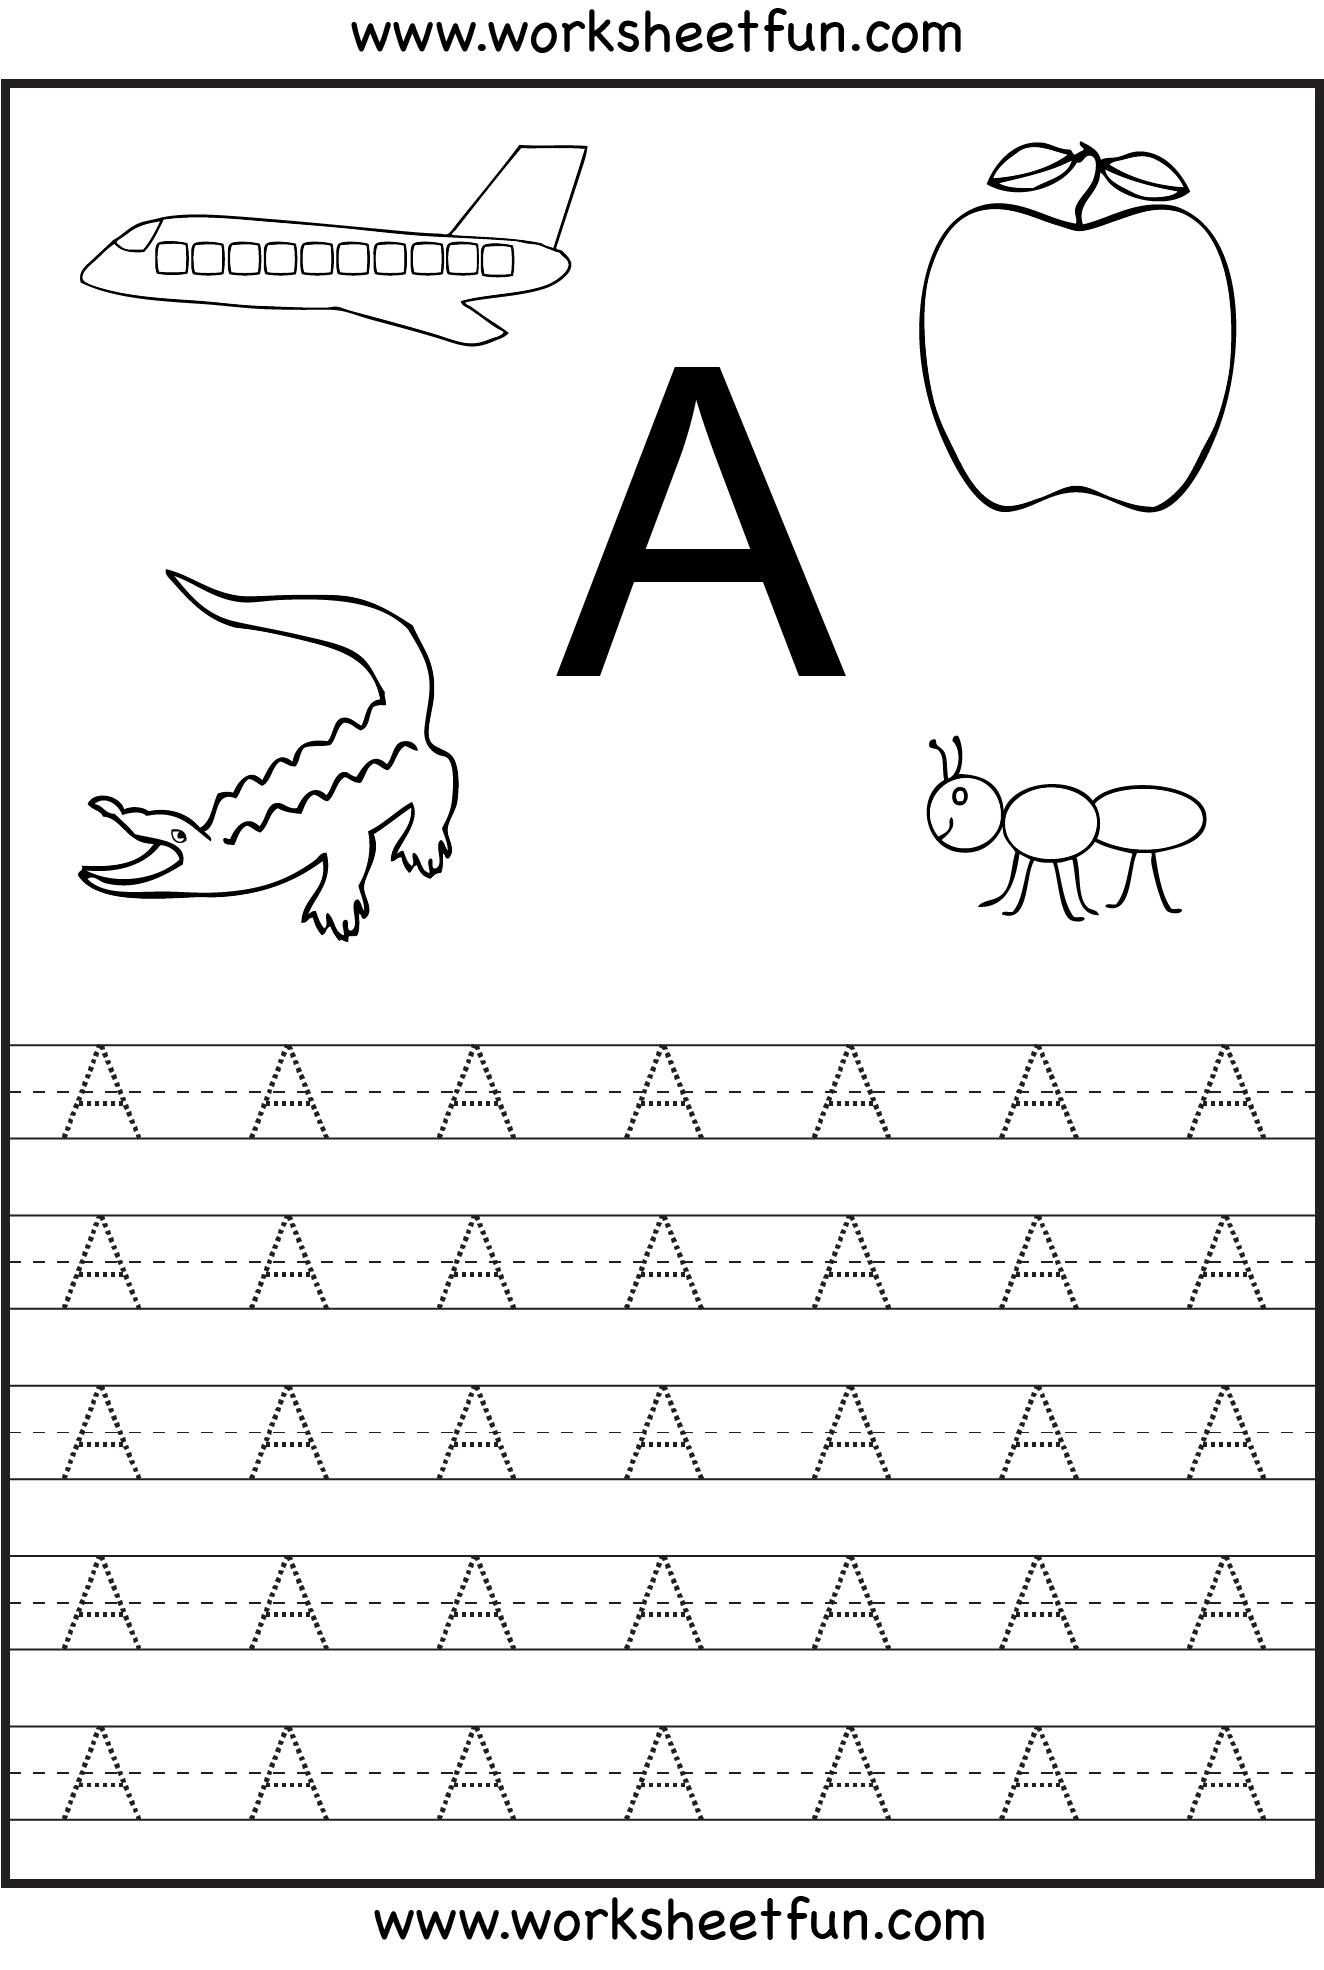 Tons And Tons Of Awesome Worksheets Carolyn Rafaelian 